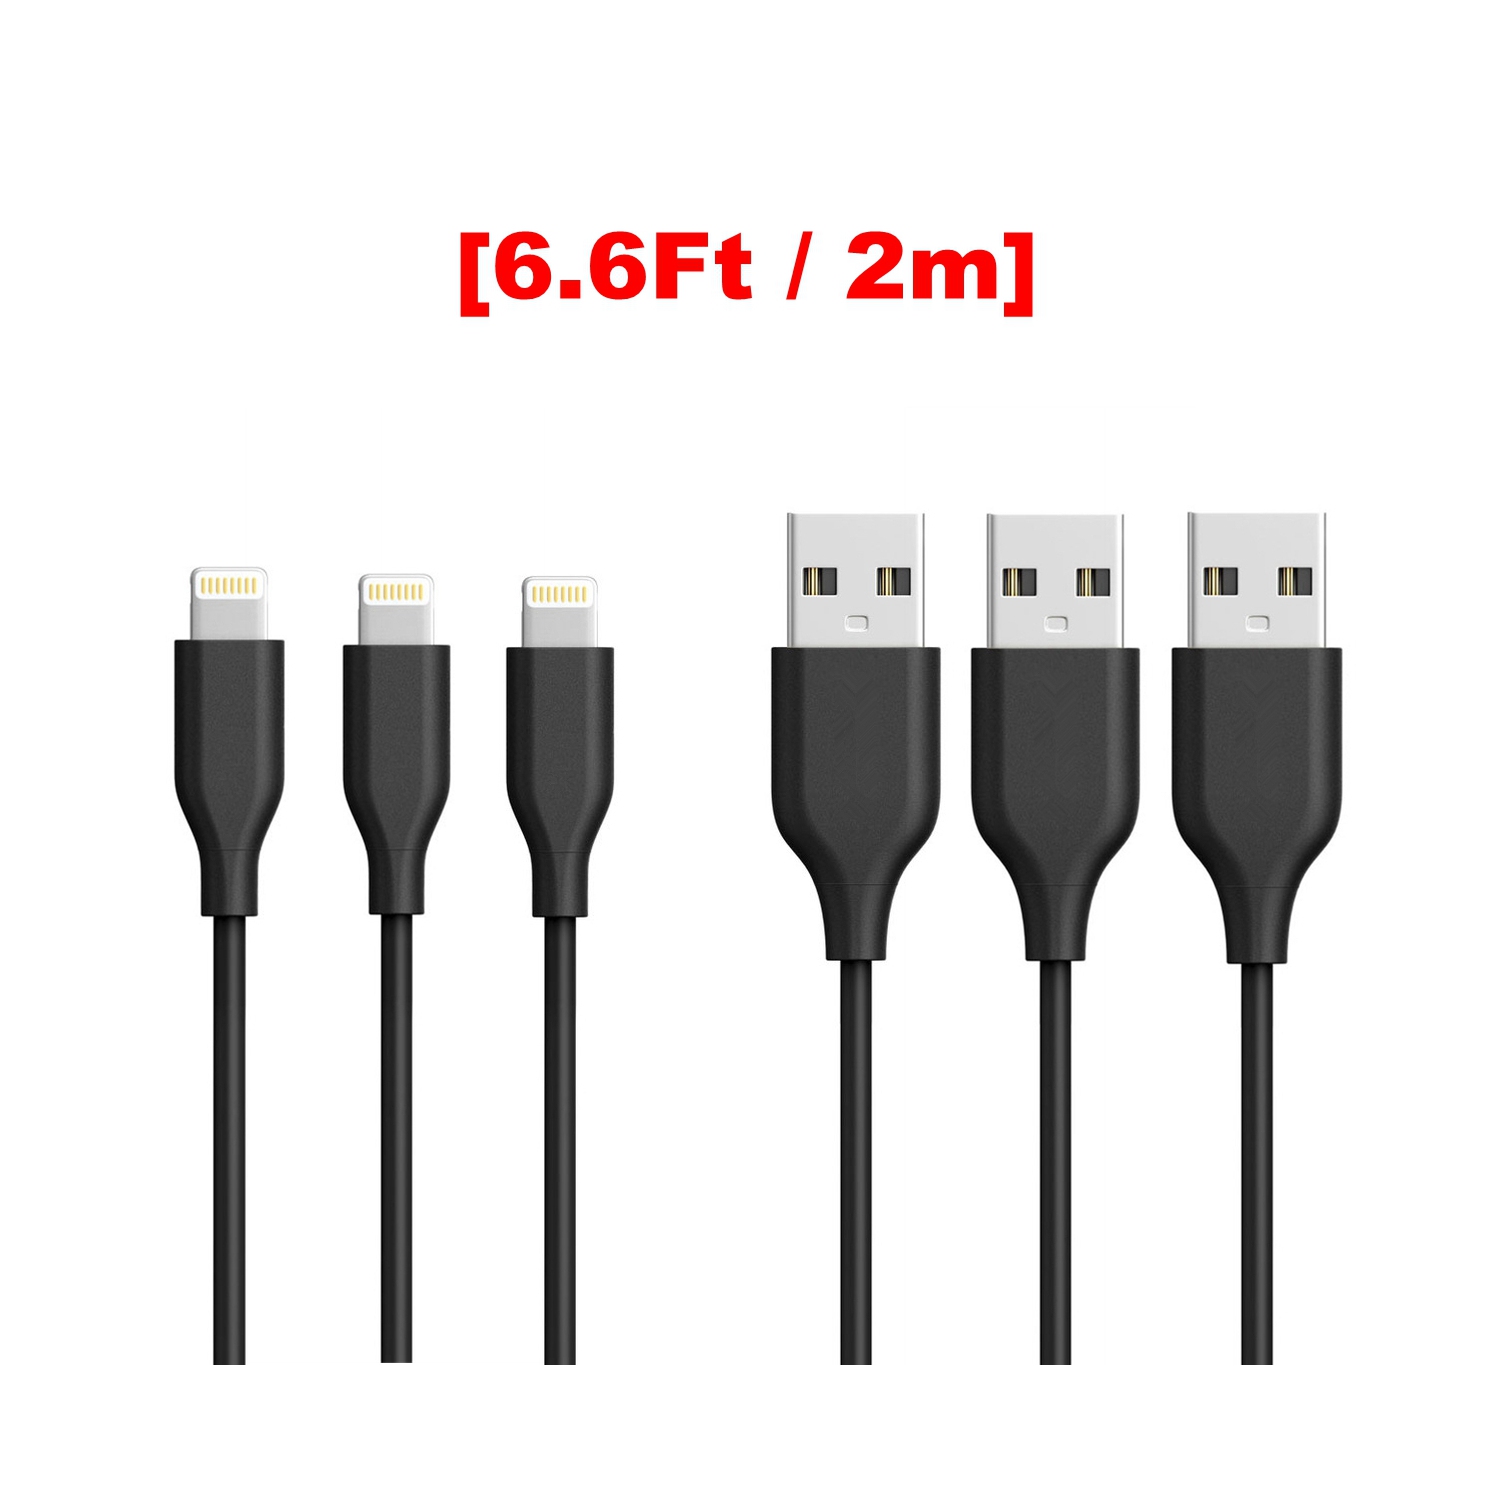 [3 Packs](6.6Ft / 2m) iPhone Charging Charger Cord Lightning to USB Cable for AirPods iPod iPad Air Mini iPhone Pro Max, Black